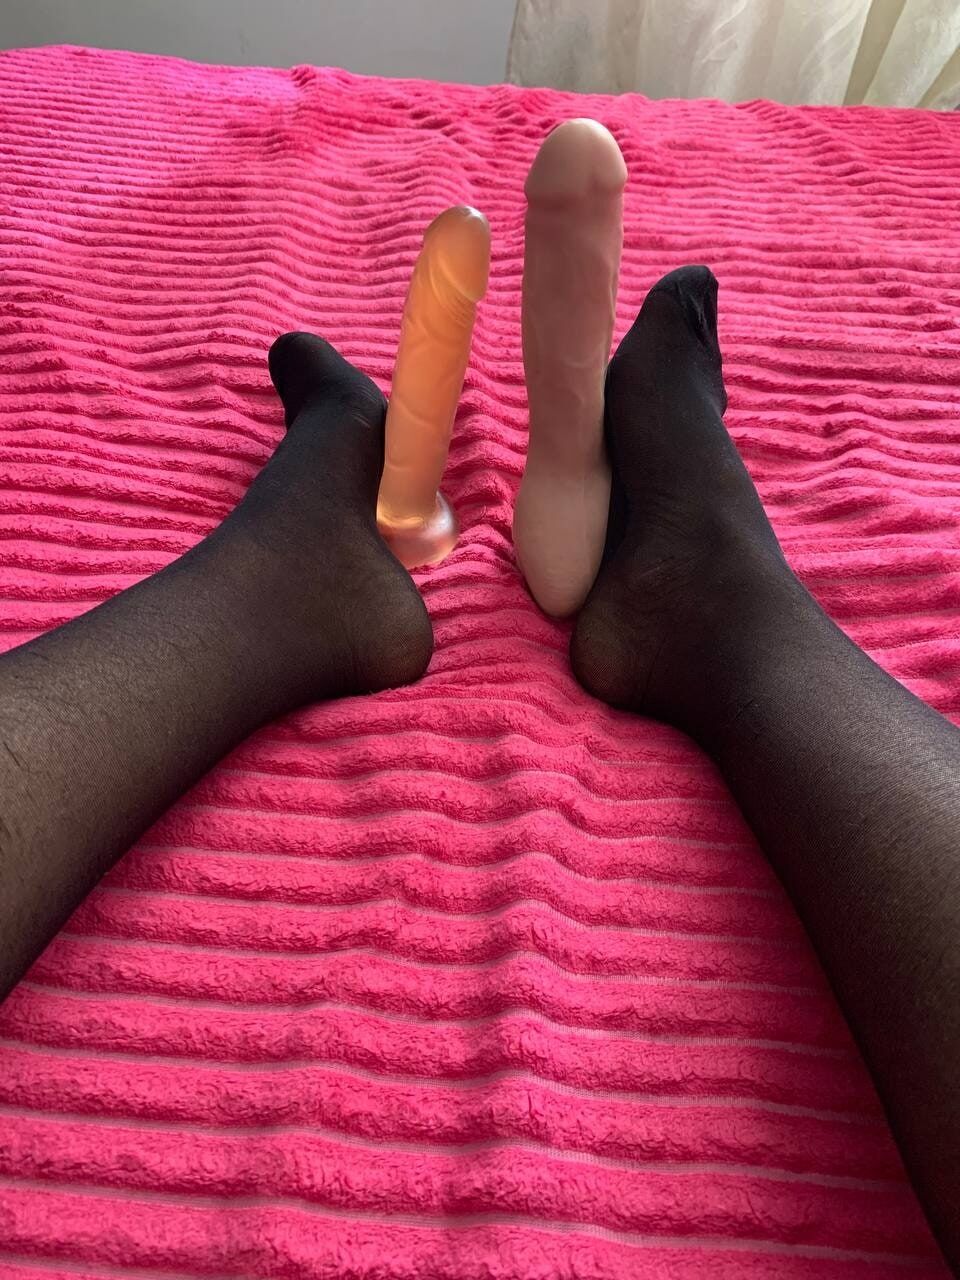 I want you to eat my beautiful feet  #4